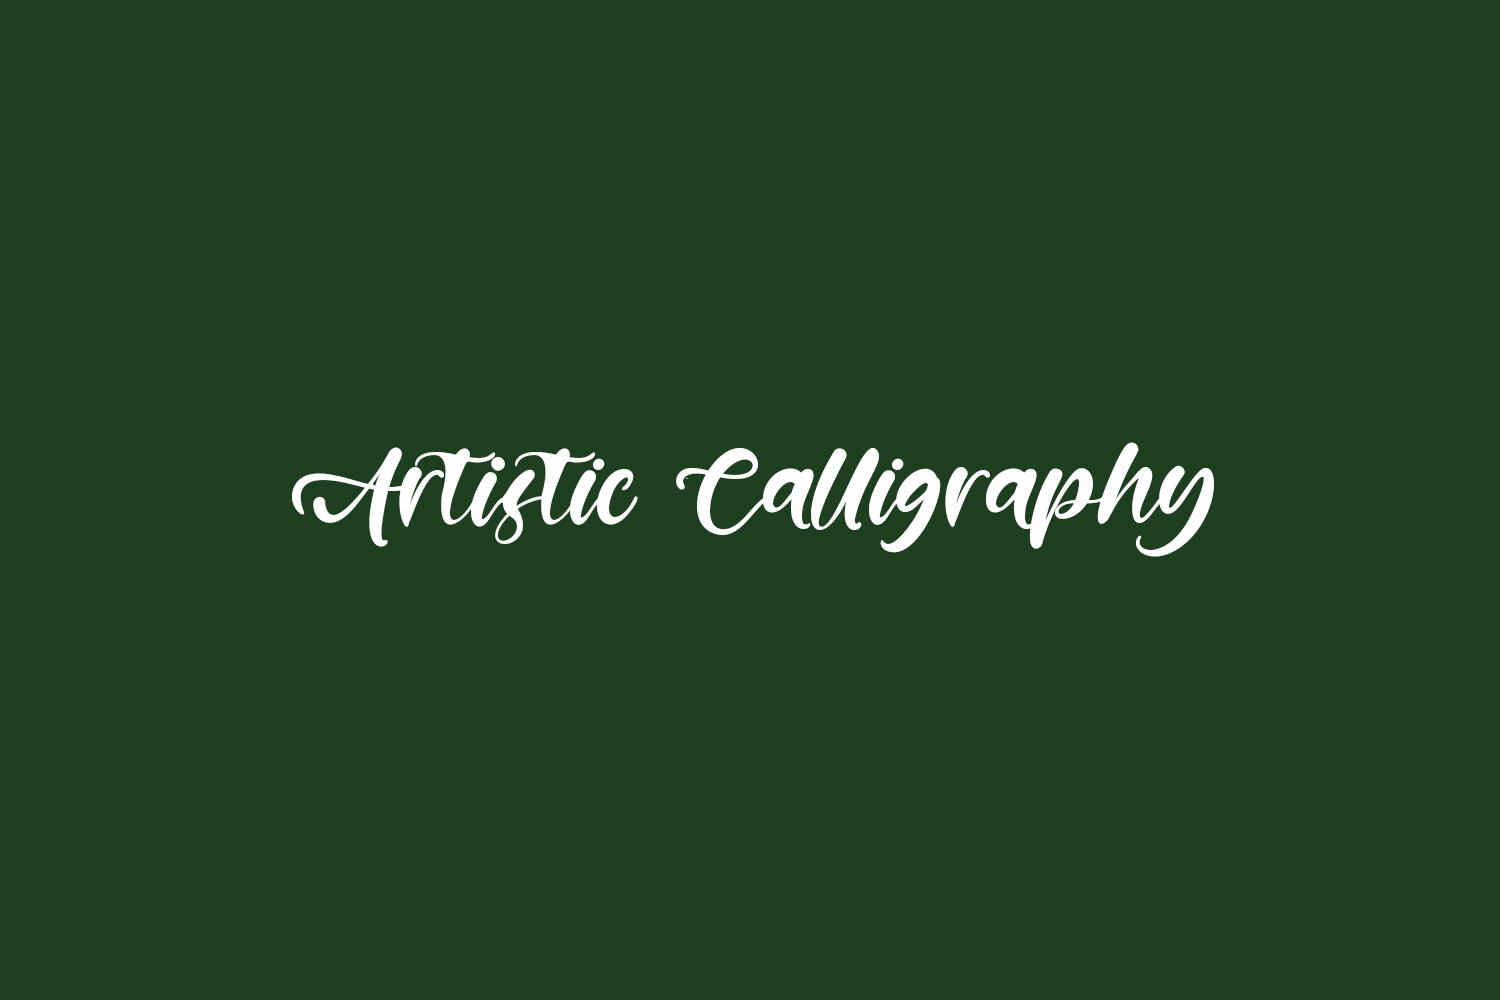 Artistic Calligraphy Free Font